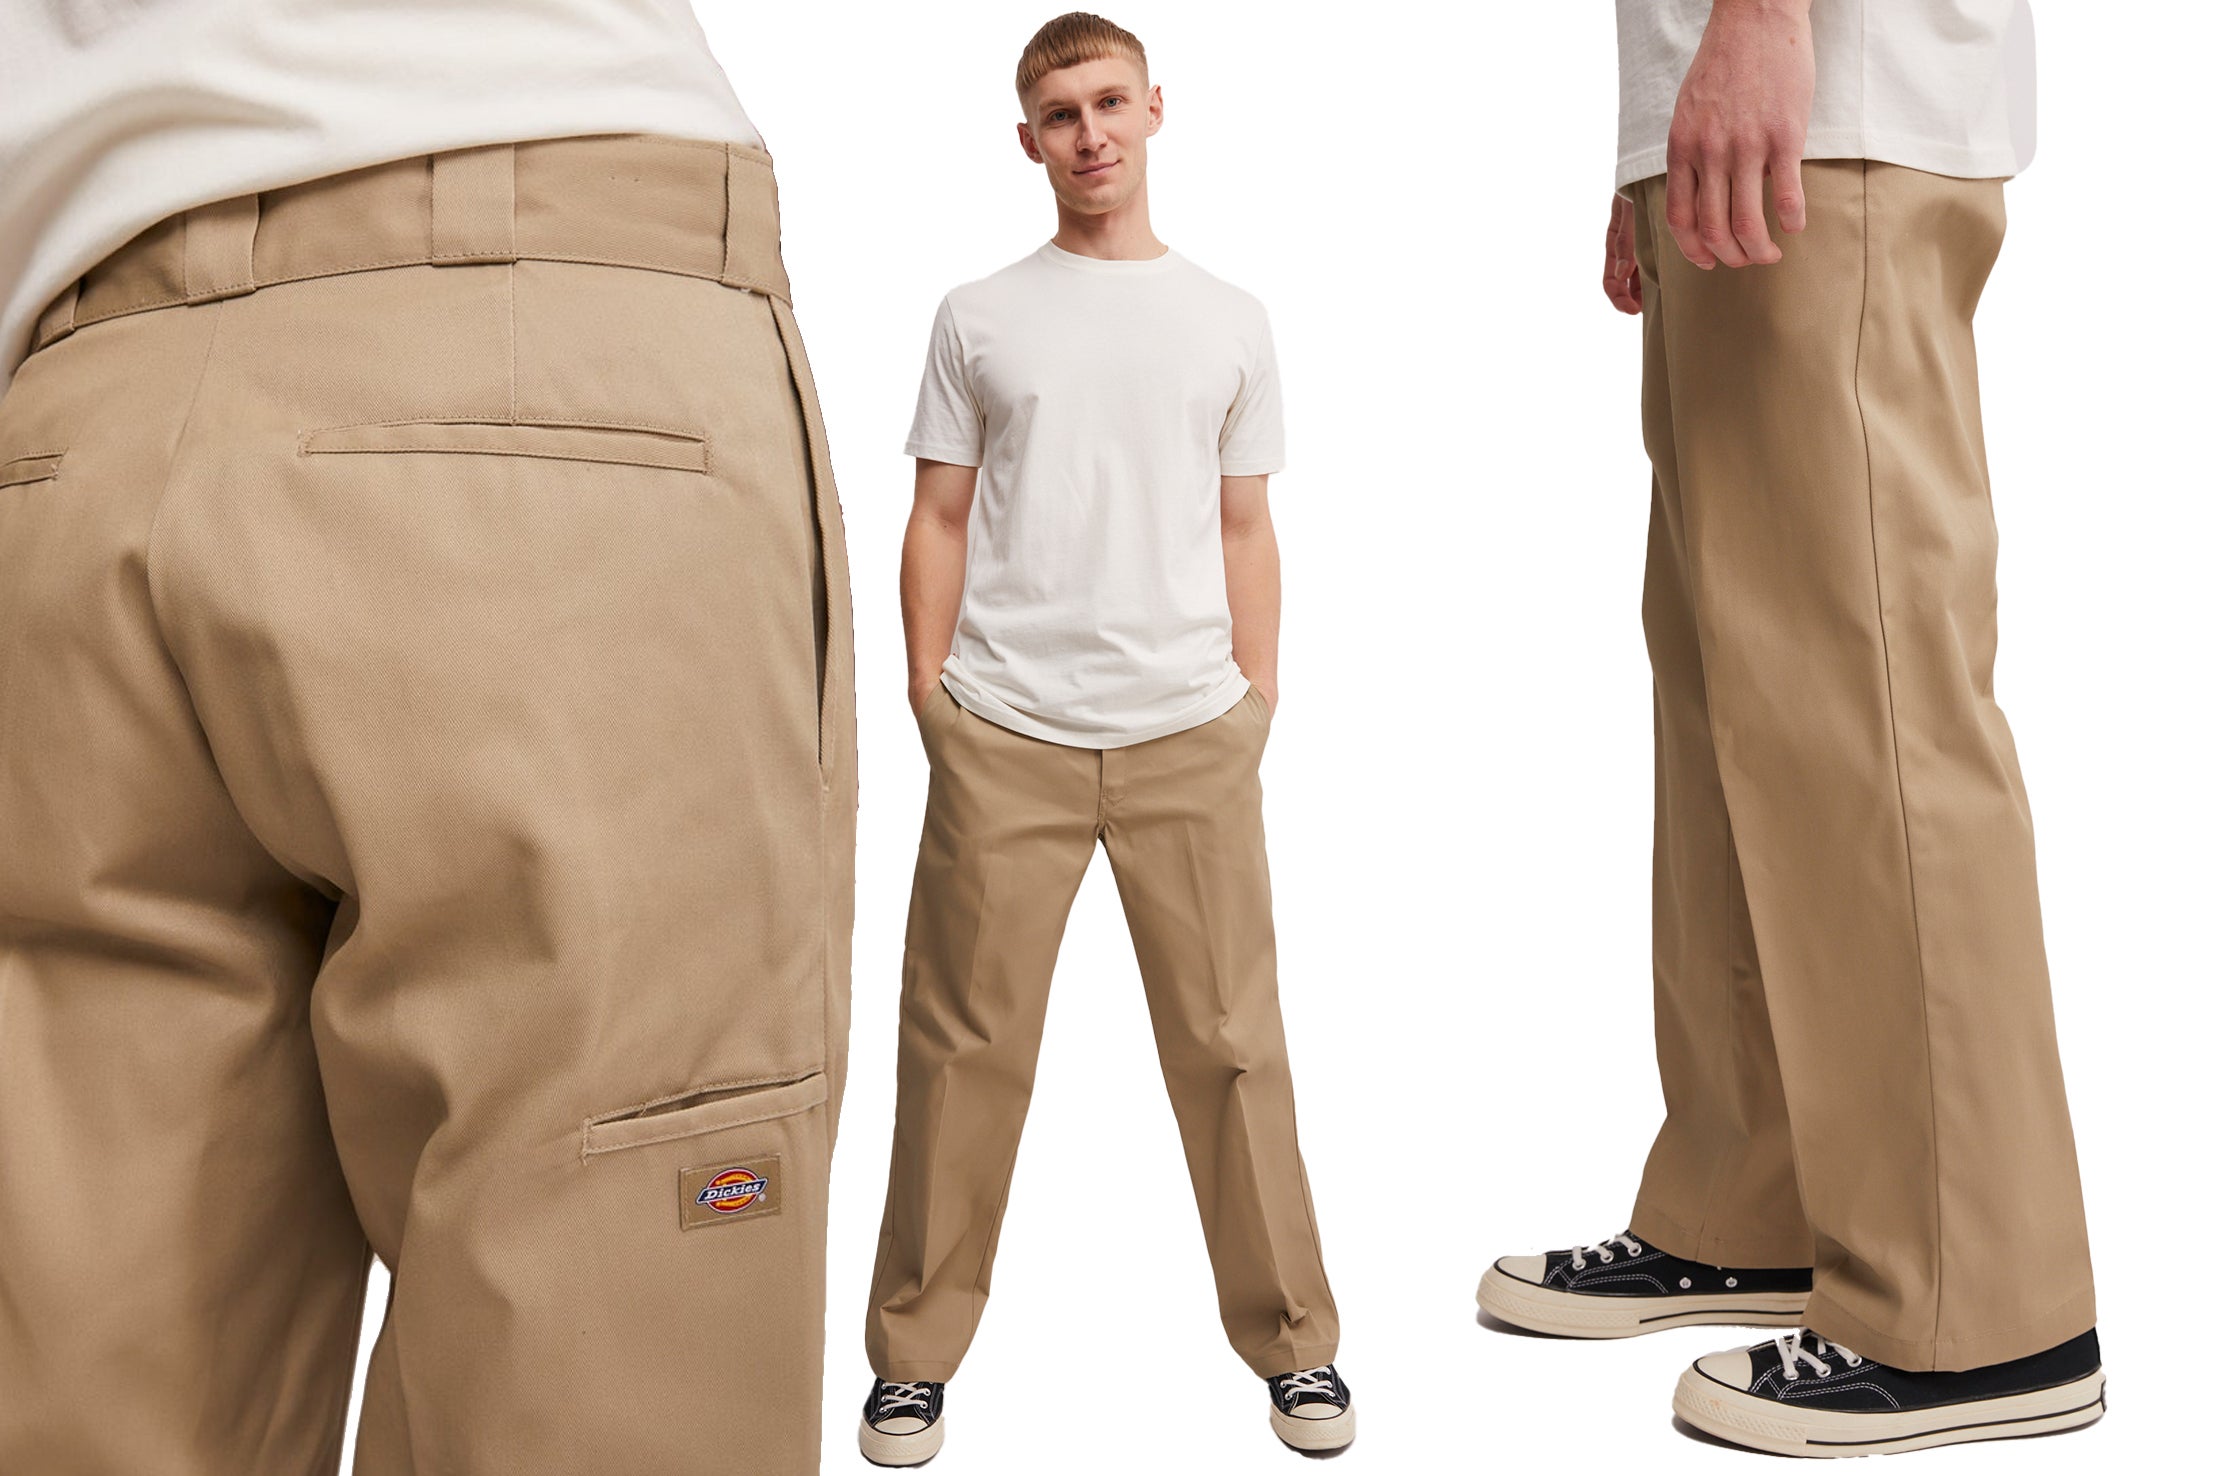 Dickies Fit Guide: Find Your Perfect Pair